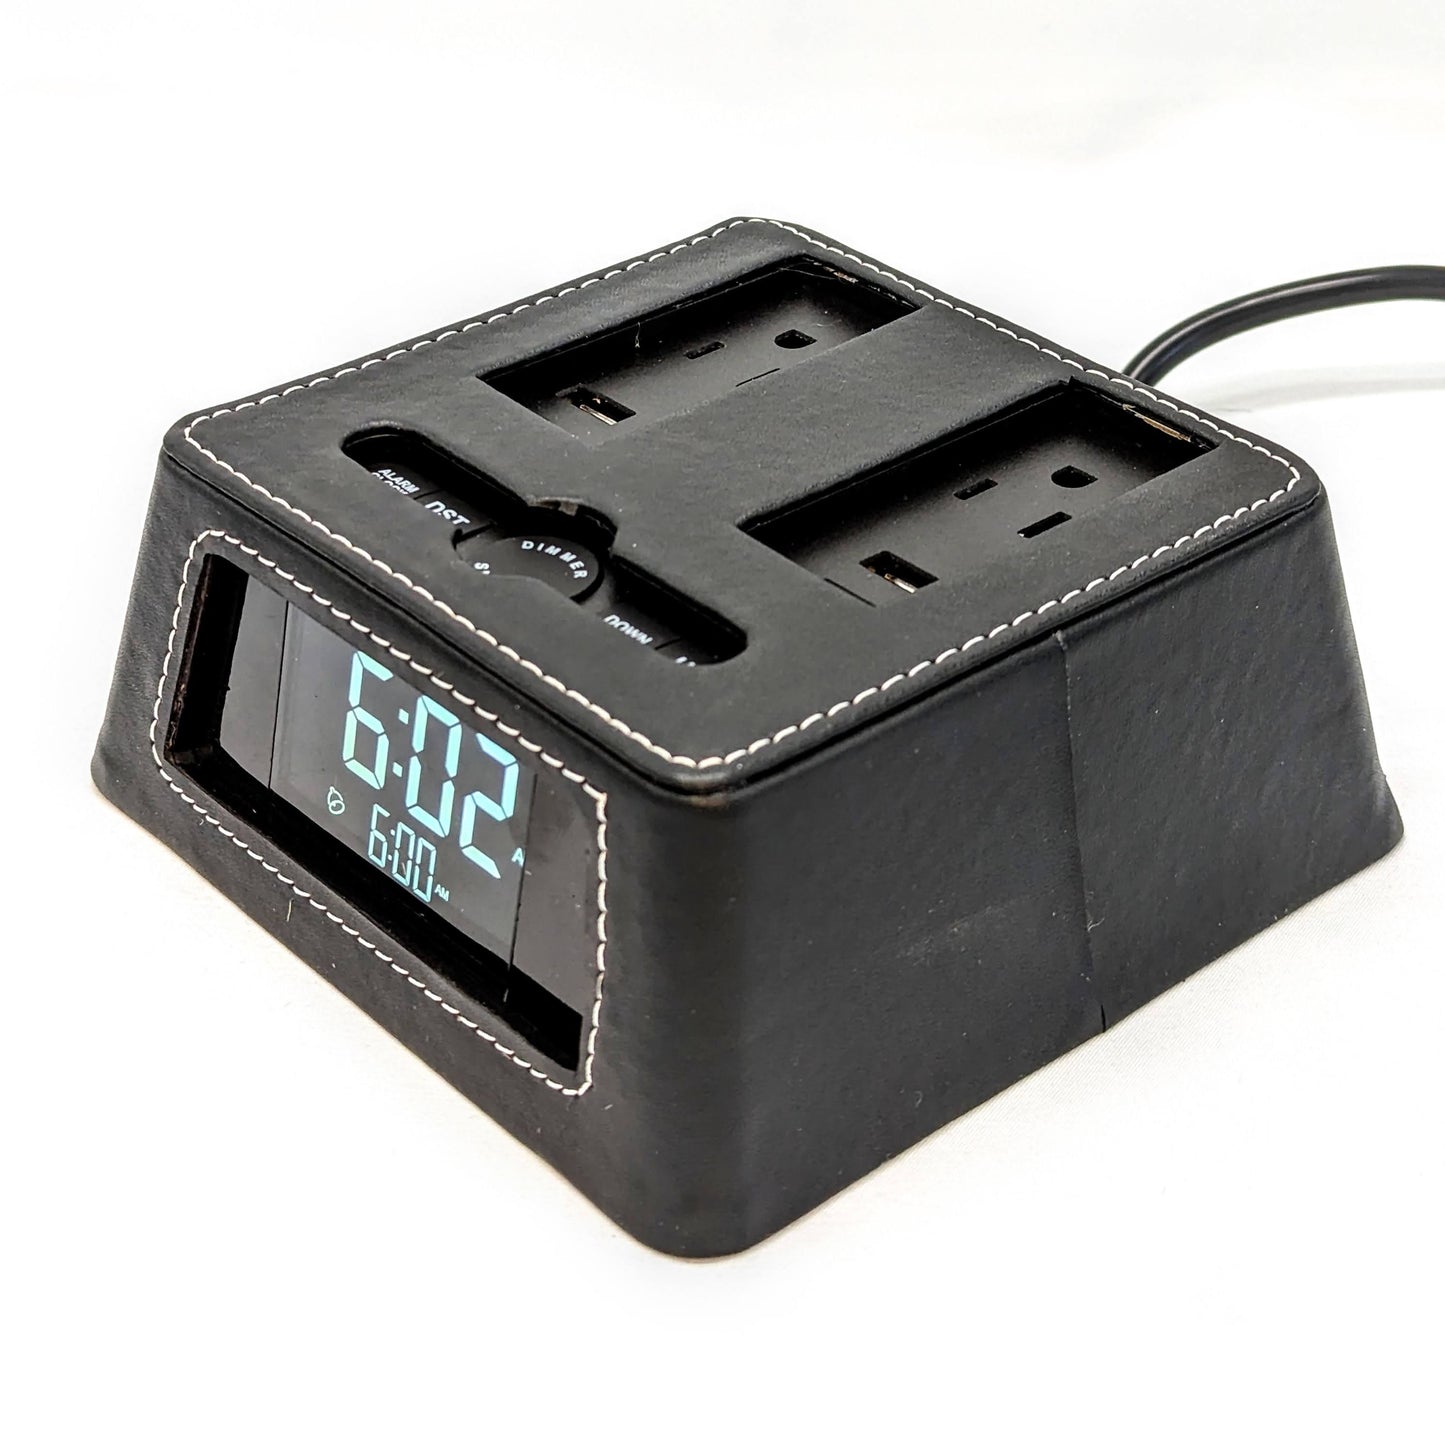 Power Hub Ultra Clock with black leatherette cover.  A charging and power hub that fits the bill for hotels, vacation rentals and general home use.